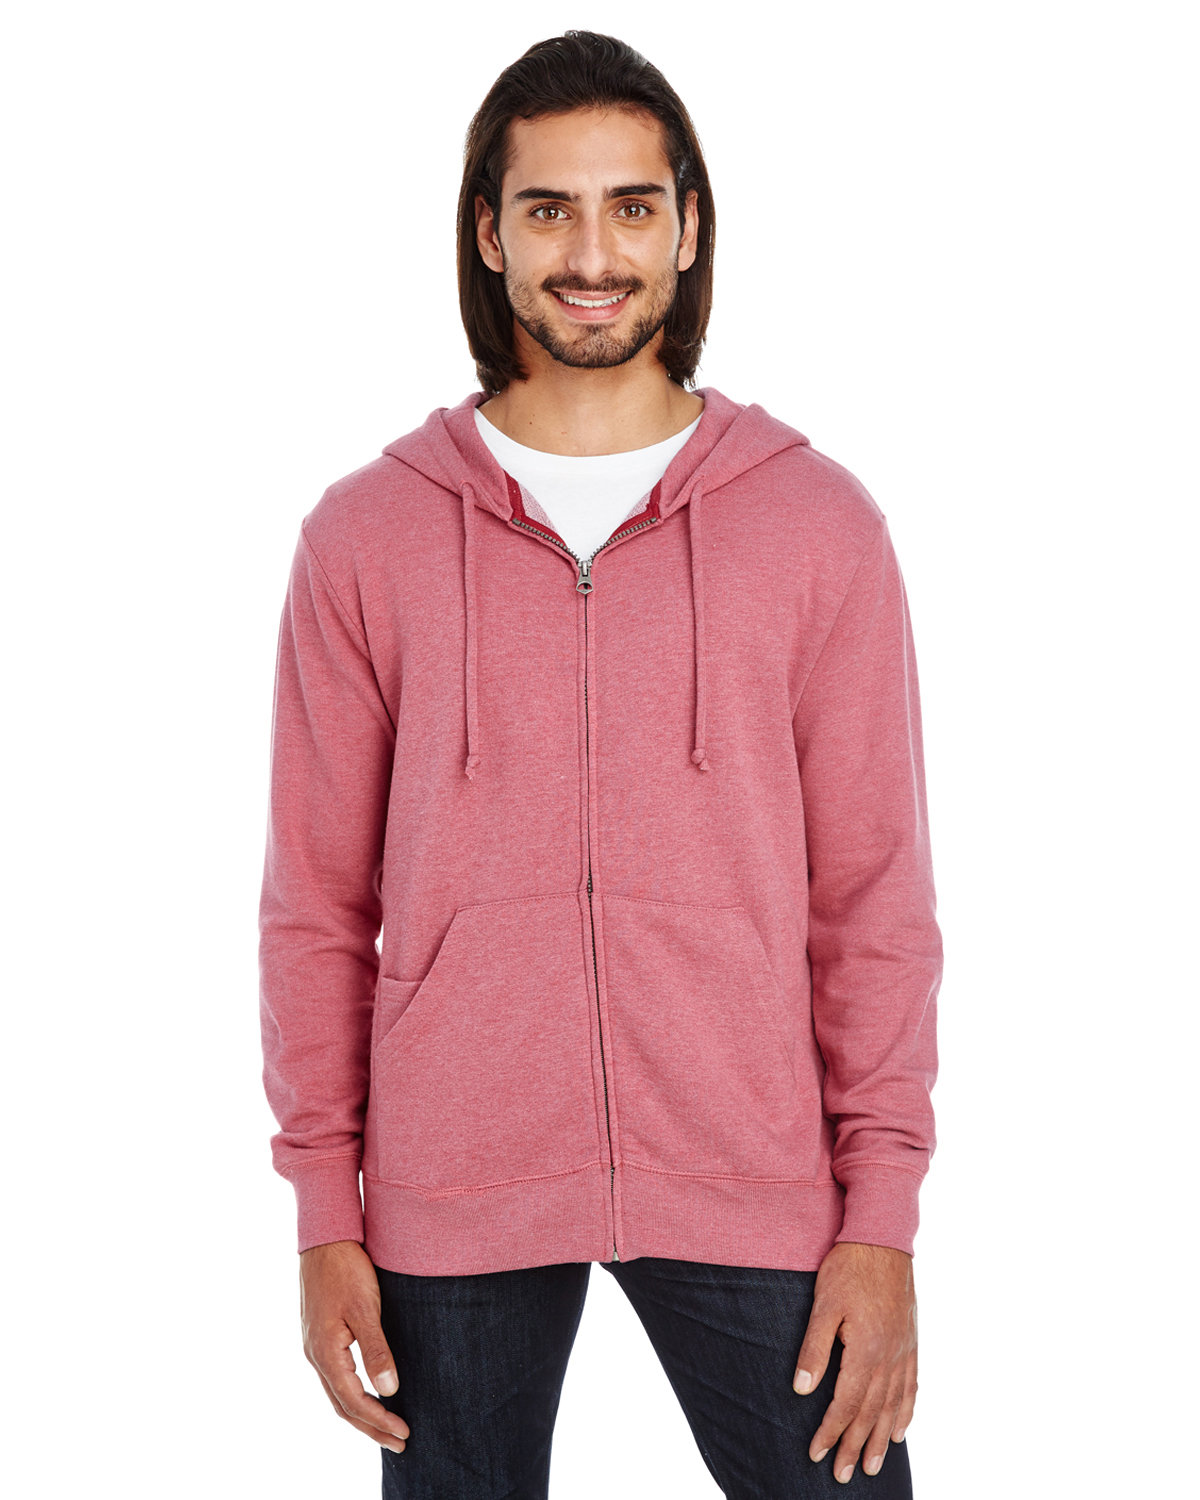 Unisex Triblend French Terry Full-Zip-Threadfast Apparel